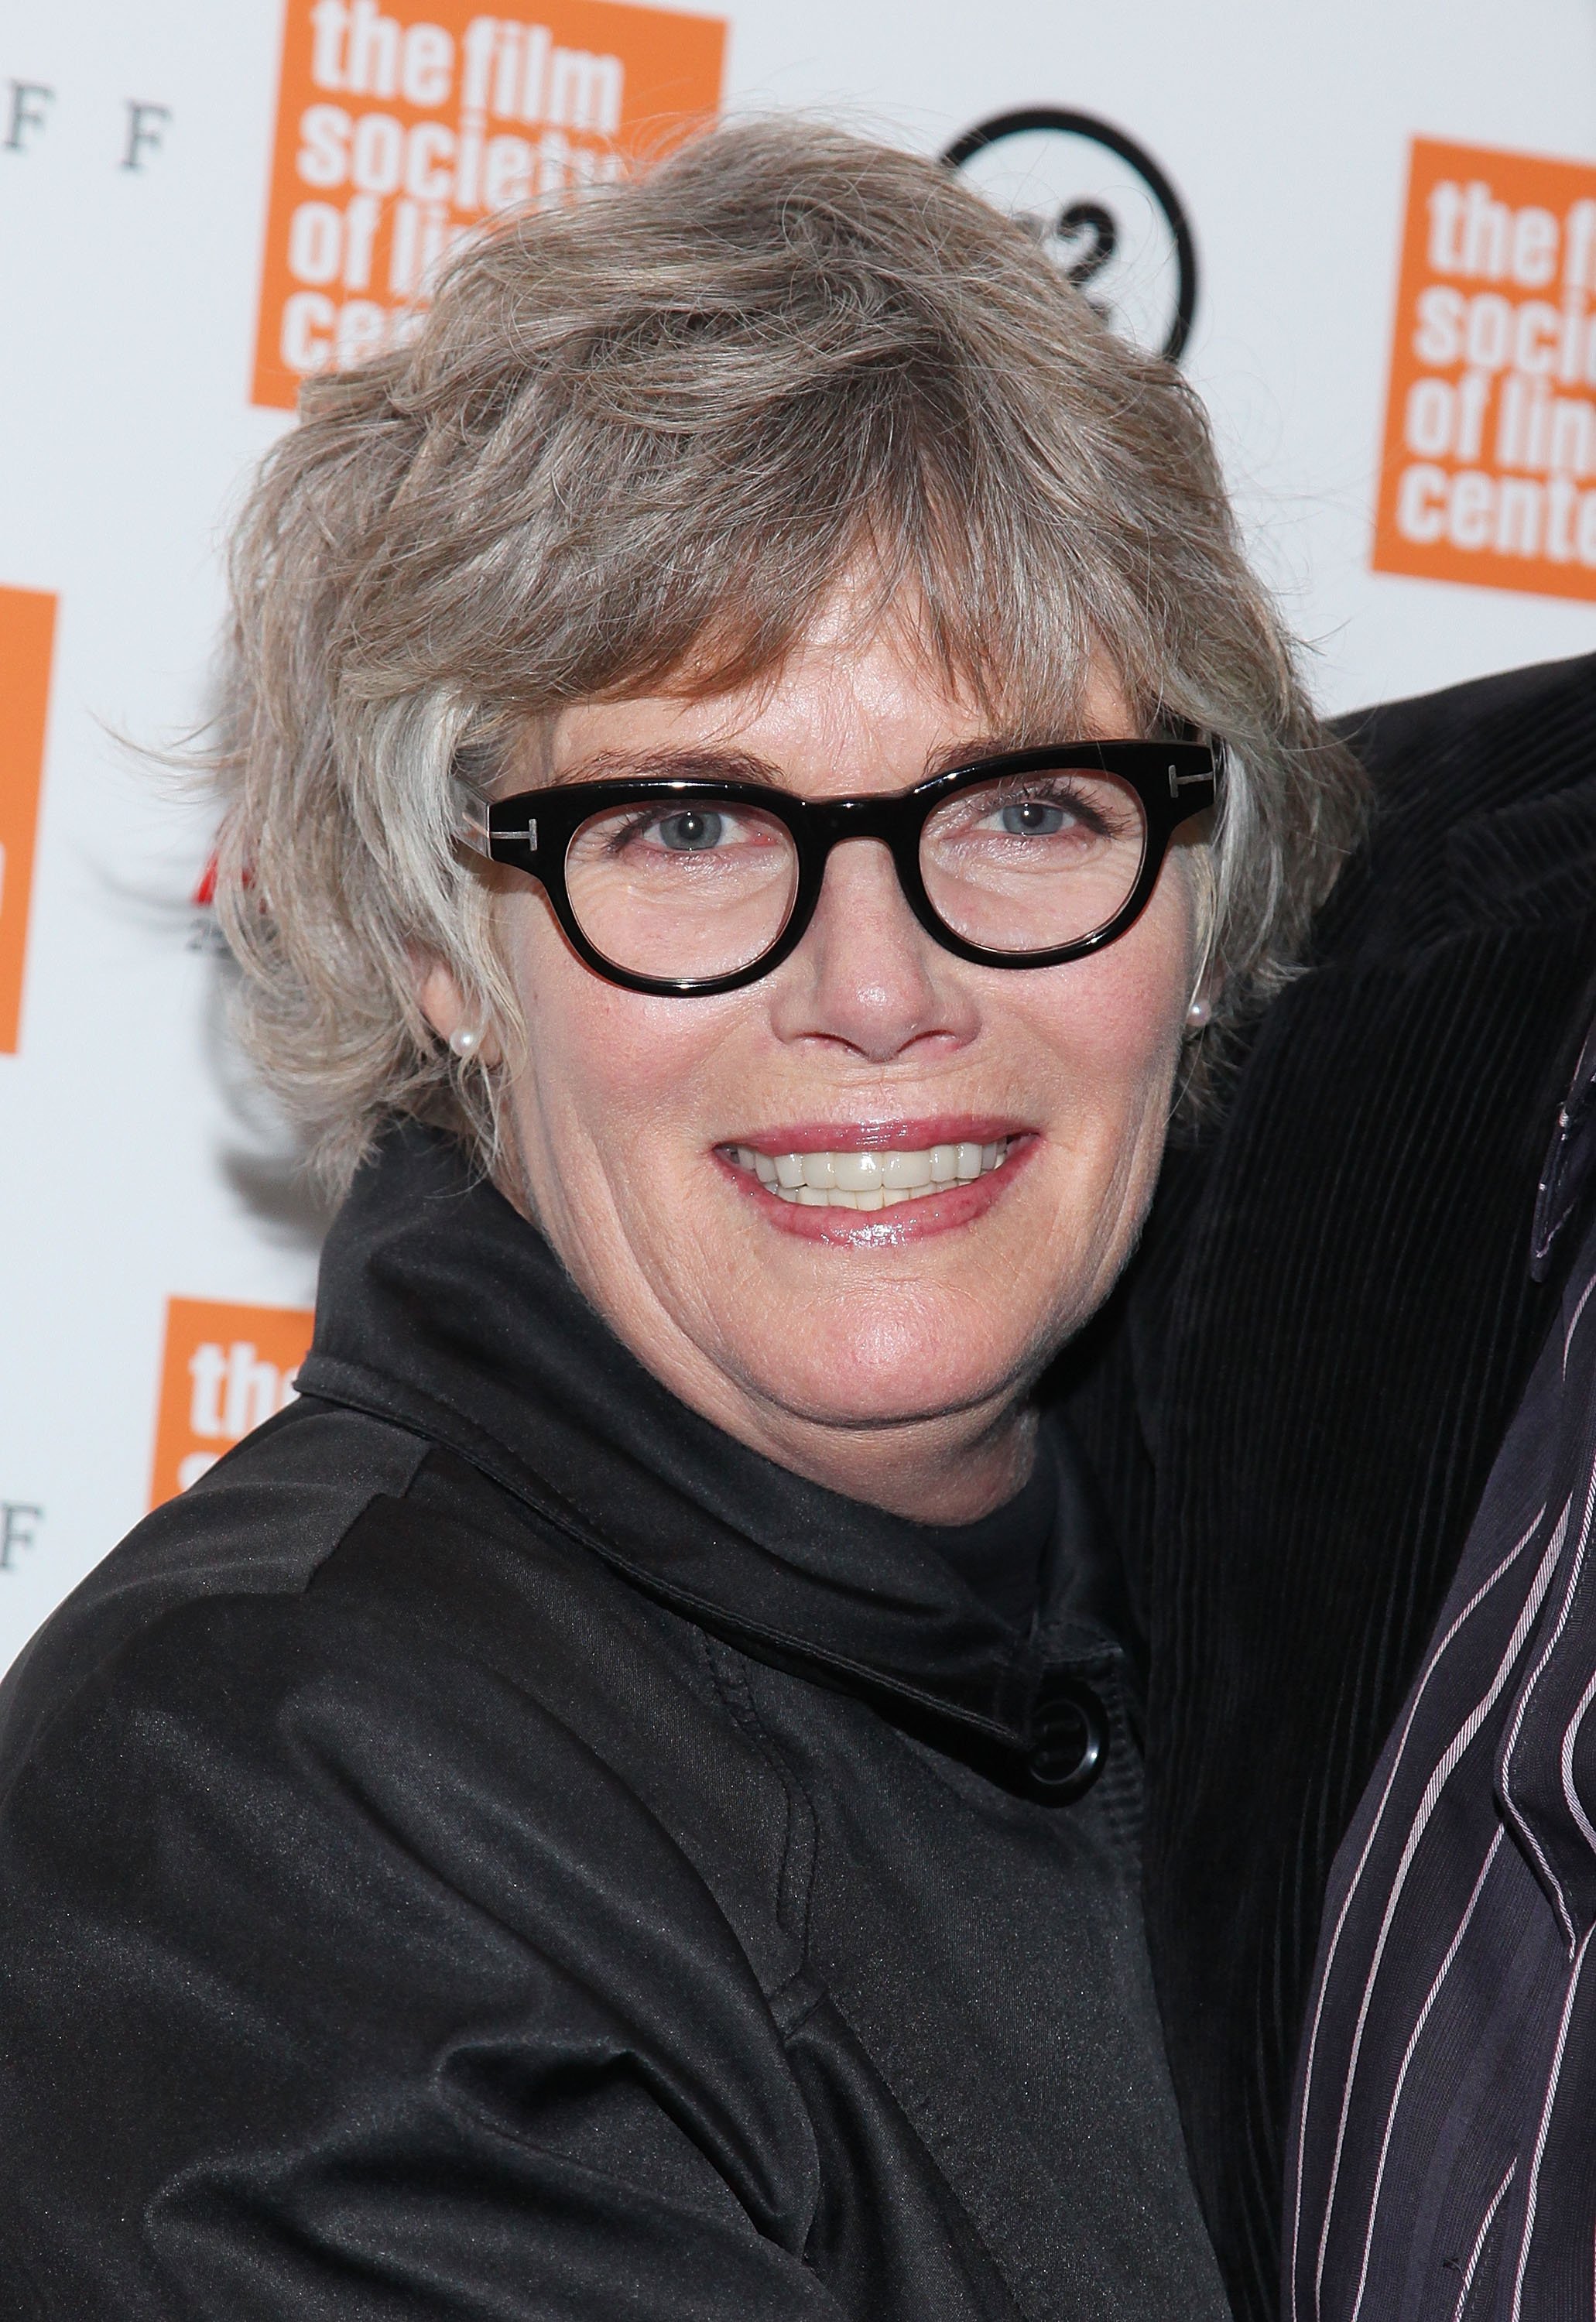 Kelly McGillis at the "Stake Land" premiere at The Film Society of Lincoln Center in New York City | Photo: Mike Coppola/FilmMagic via Getty Images